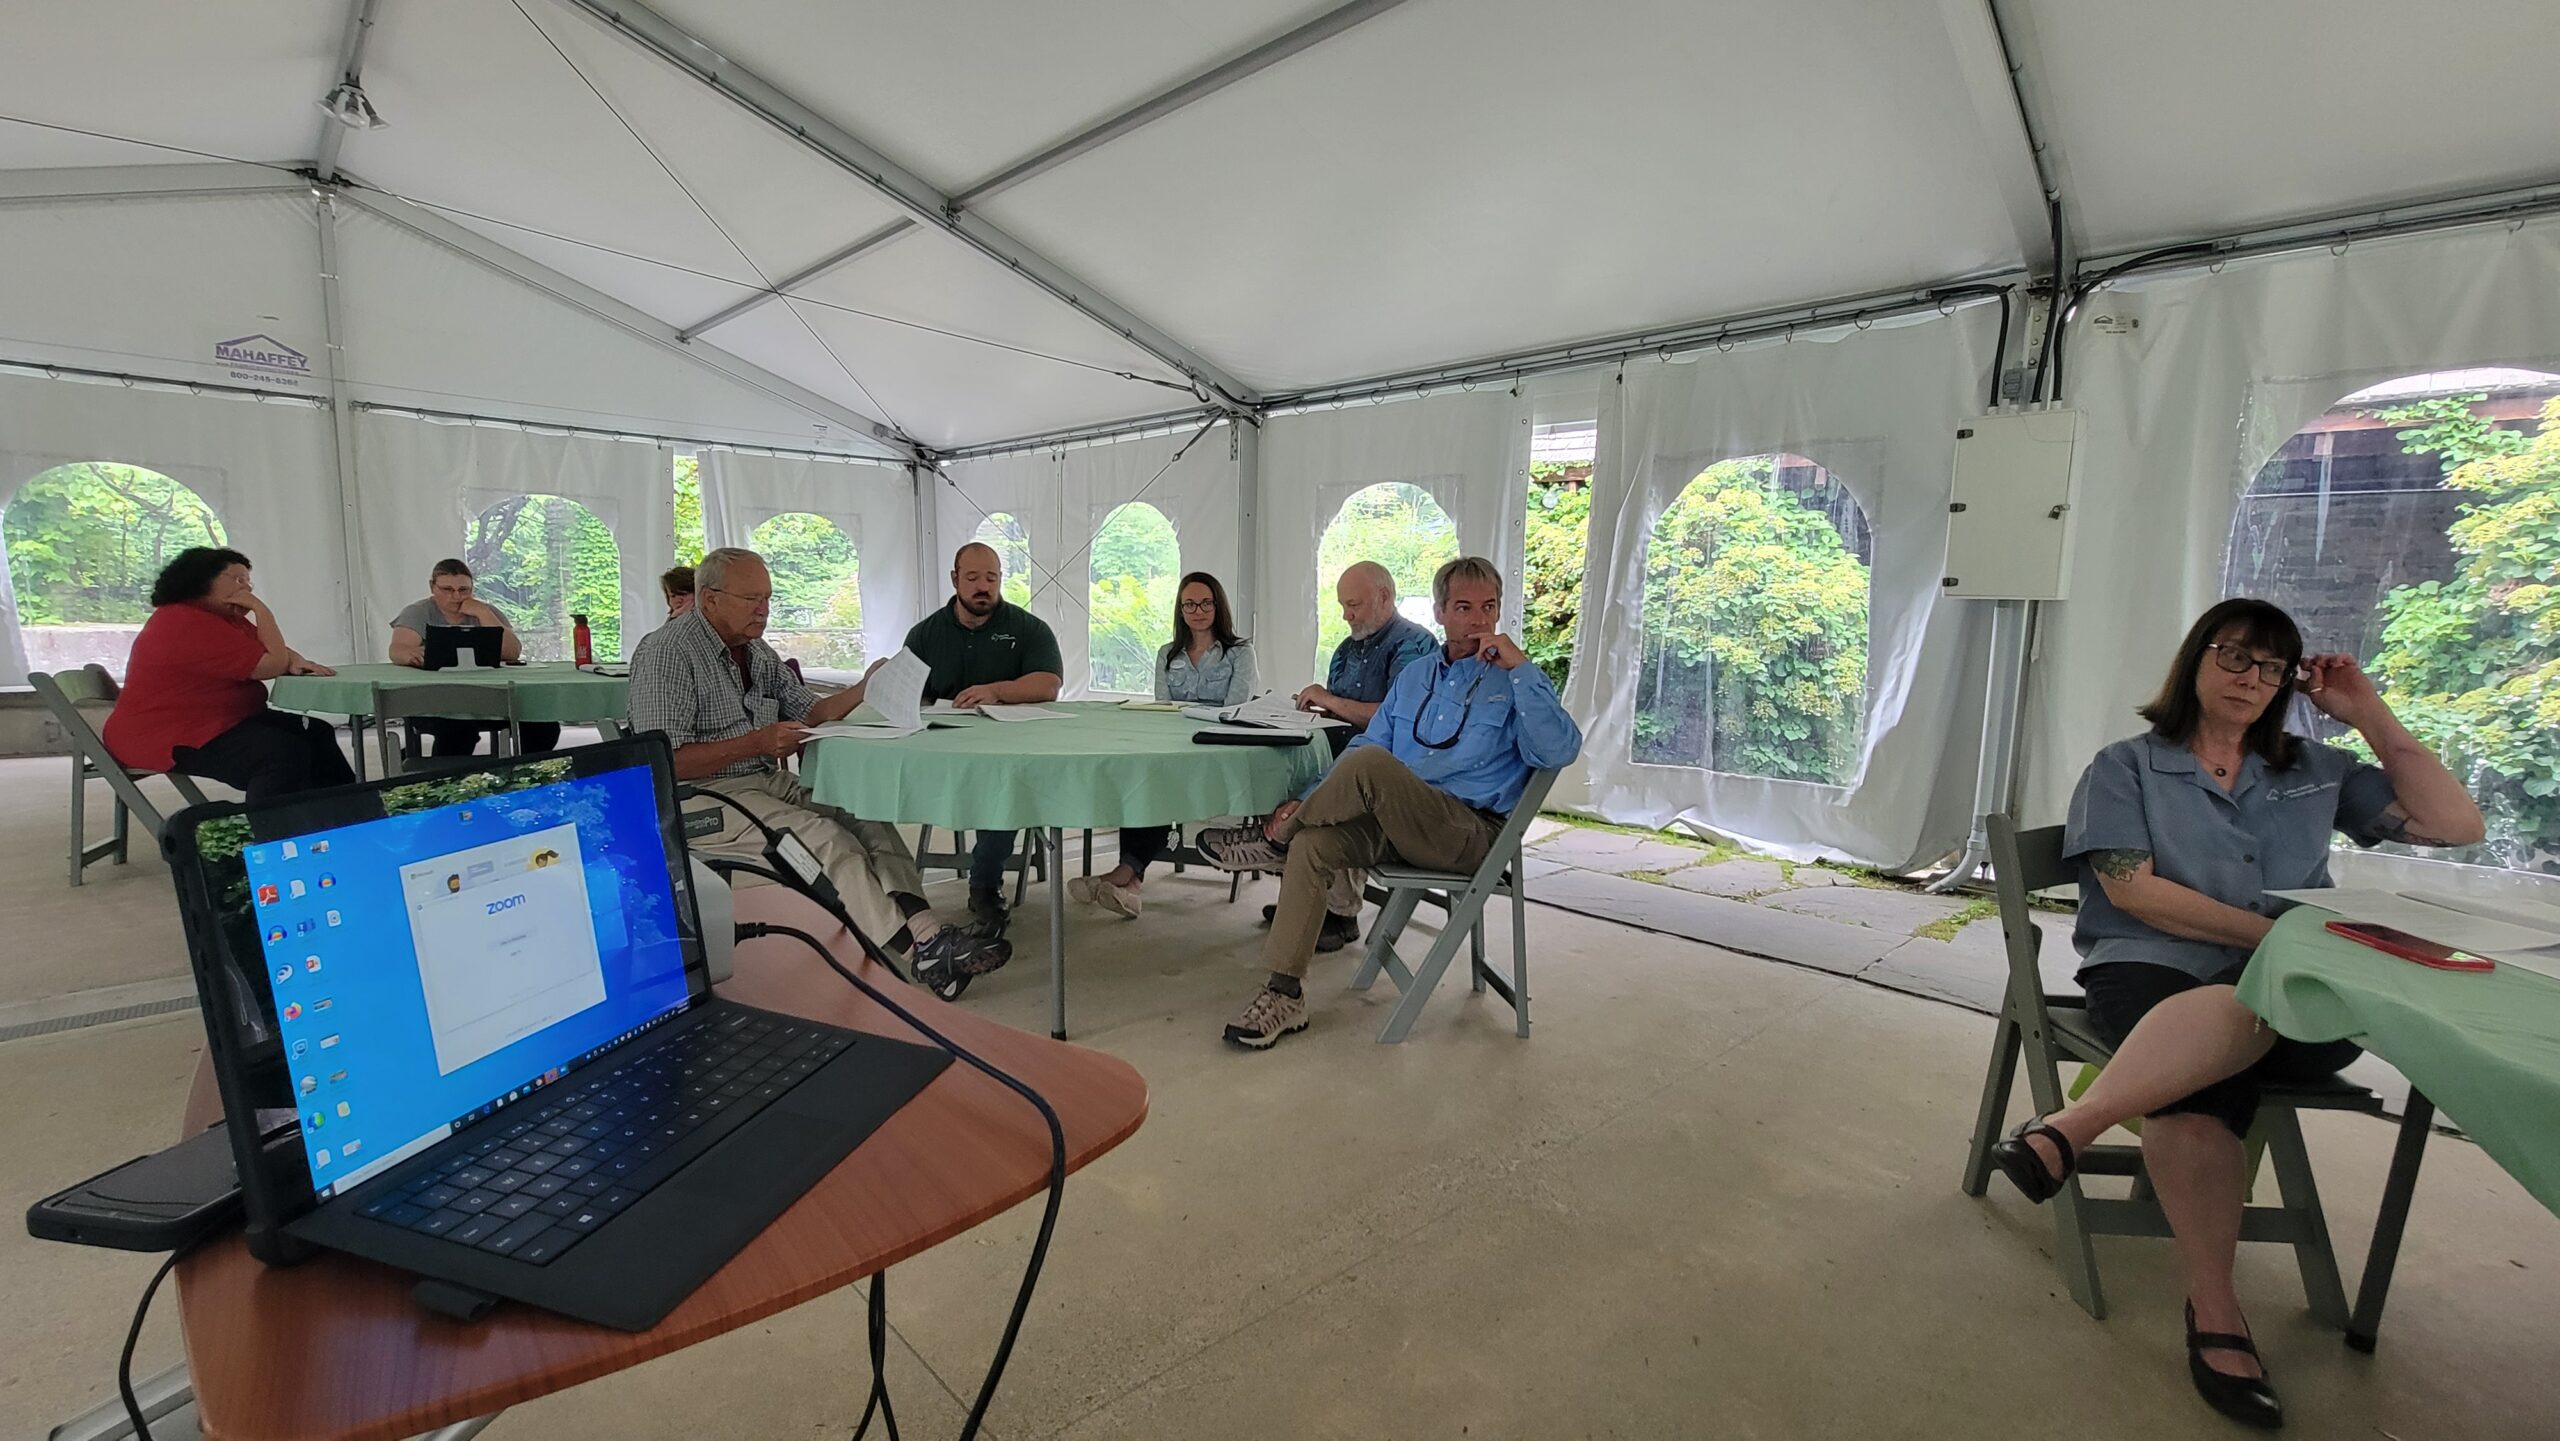 Board meeting outside under a large tent